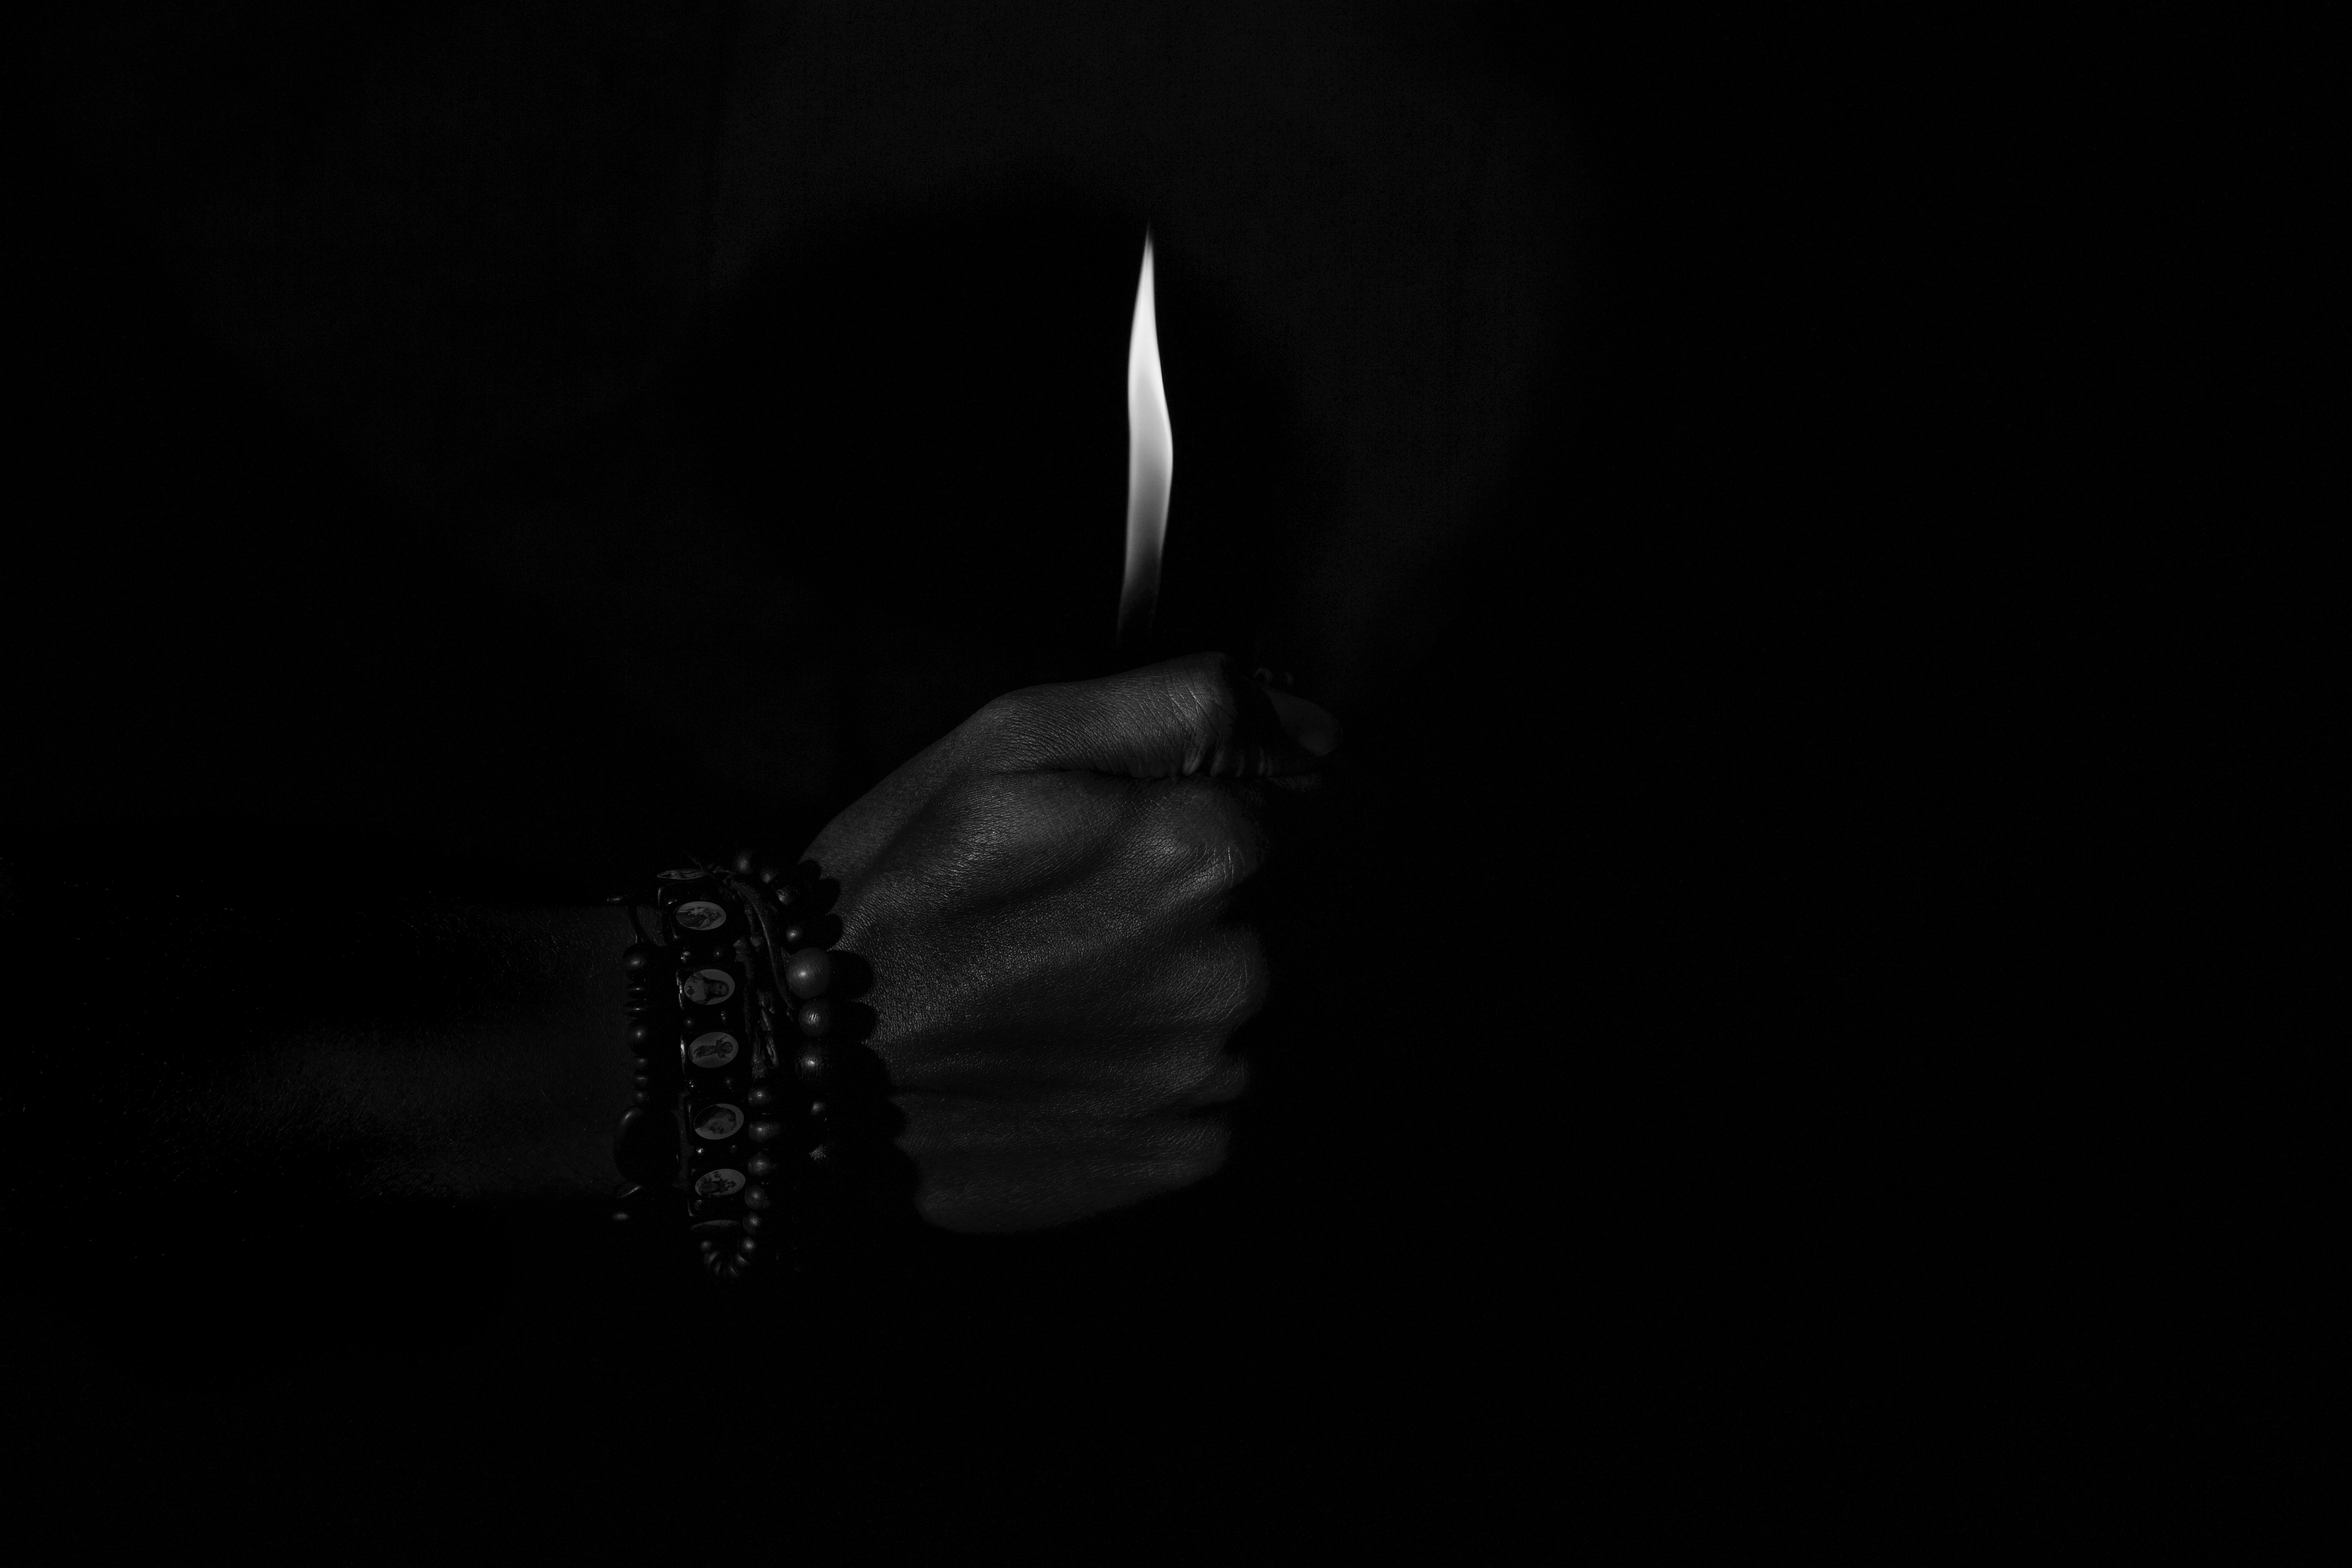 hands, chb, black, bw, candle mobile wallpaper